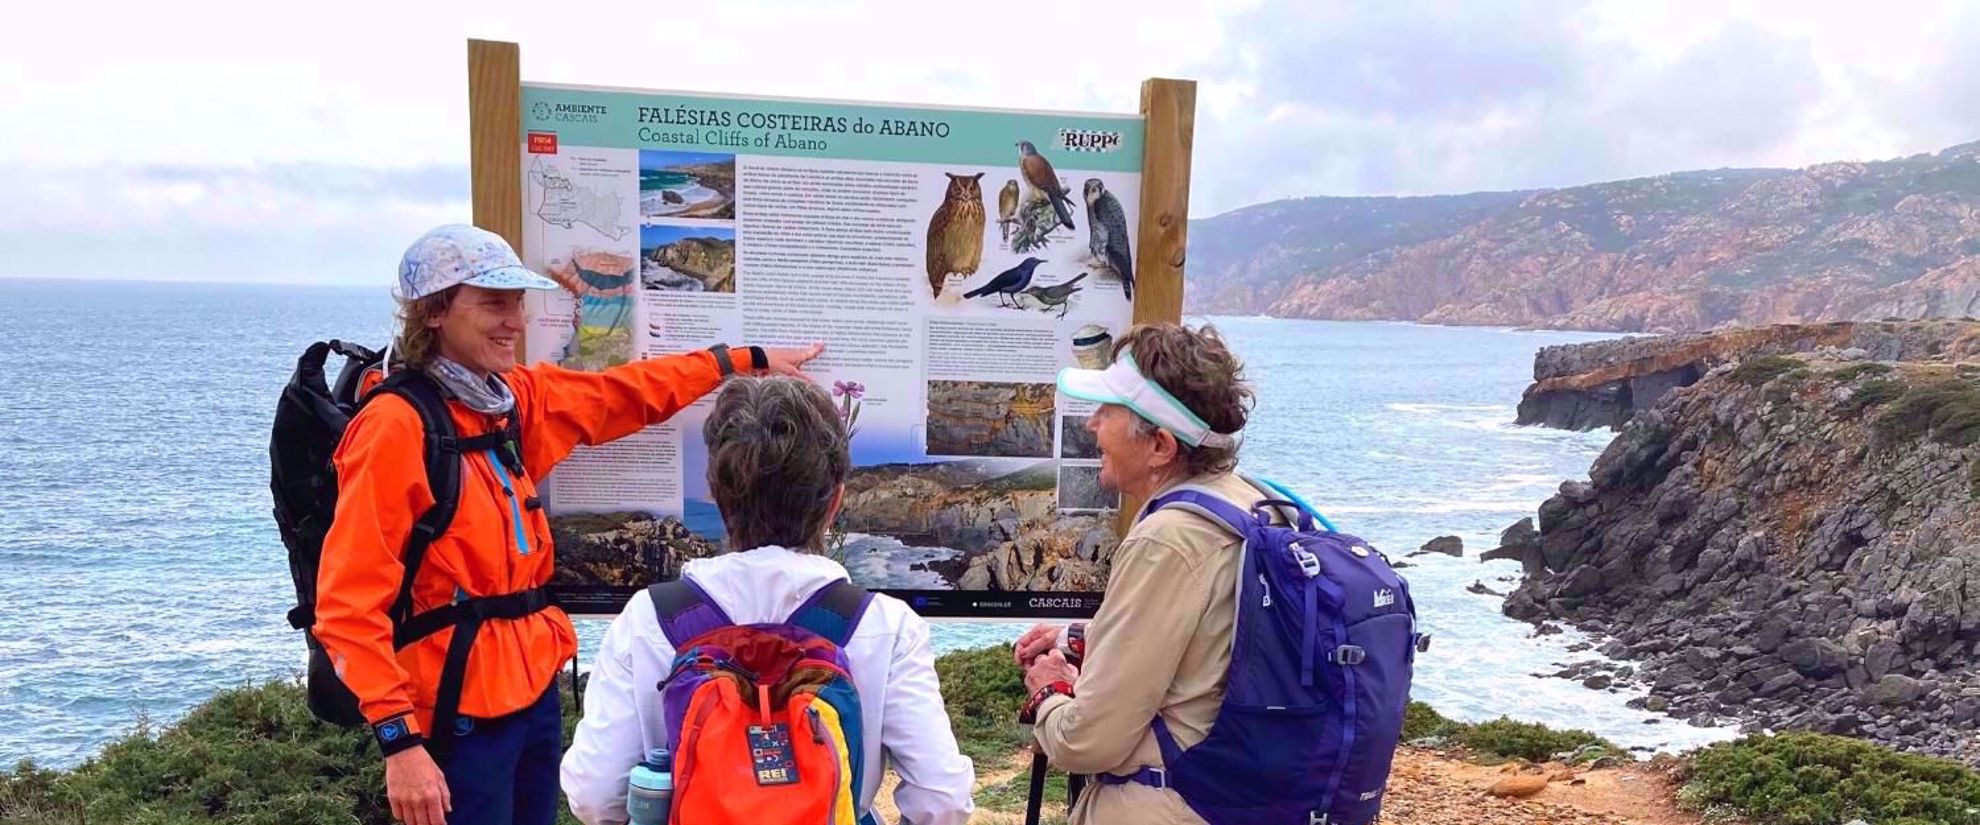 learning about natural history along the coast of portual